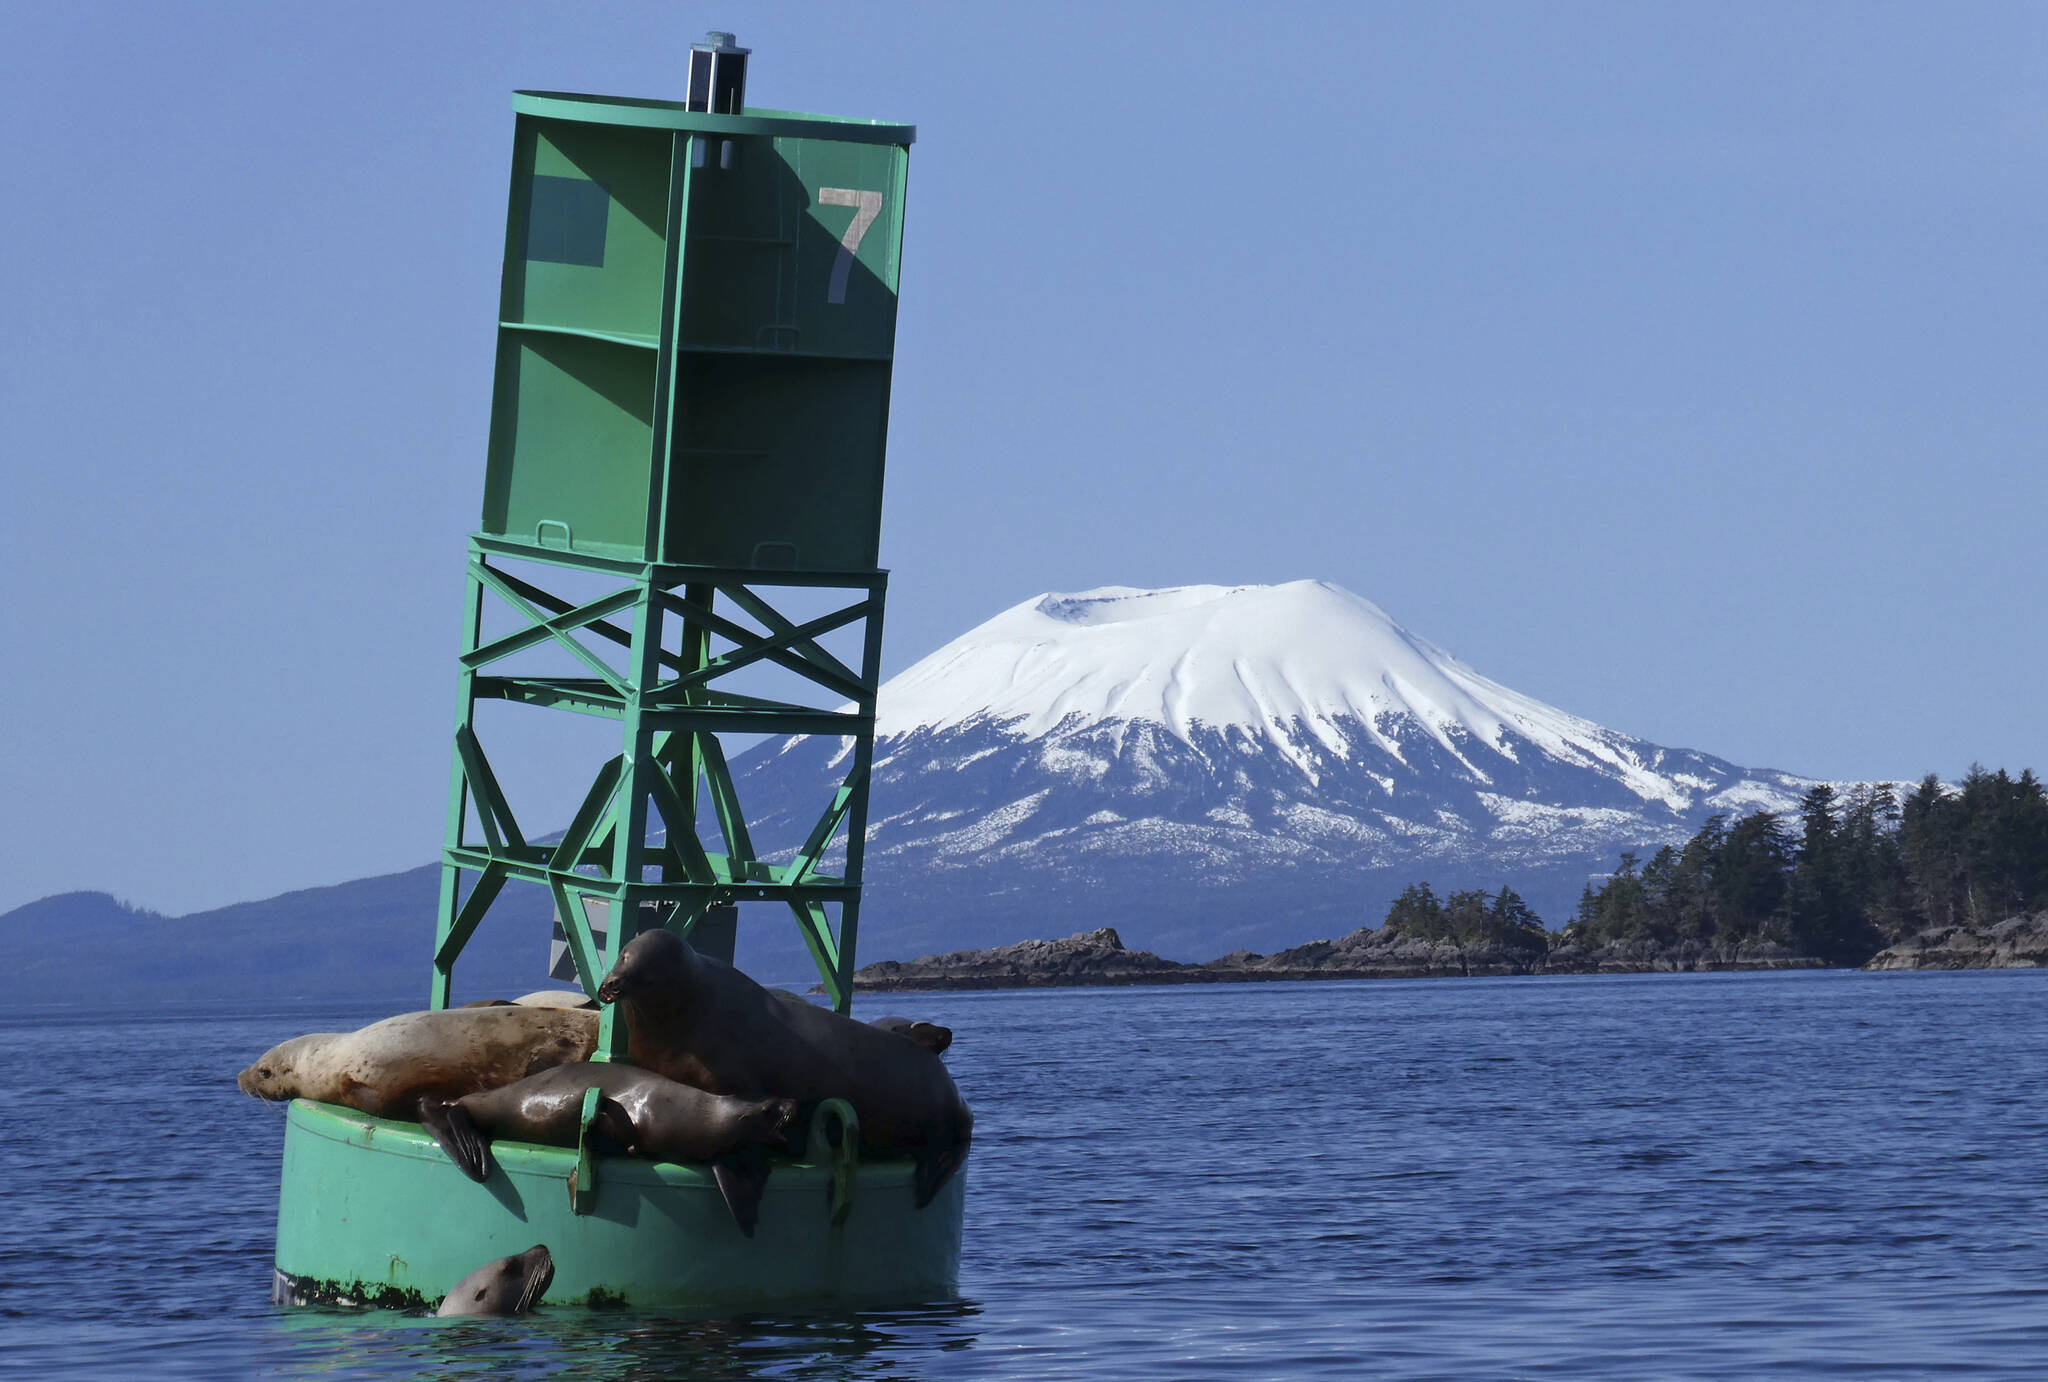 AP Photo / Becky Bohrer
With Mount Edgecumbe in the background, a sea lion pops its head out of the water next to a buoy crowded with other sea lions in Sitka, Alaska on April 7, 2018. A swarm of hundreds of small earthquakes have been reported near Mount Edgecumbe volcano 15 miles west of Sitka, in southeast Alaska. The reason for the swarm is not known, officials at the Alaska Volcano Observatory said Wednesday.